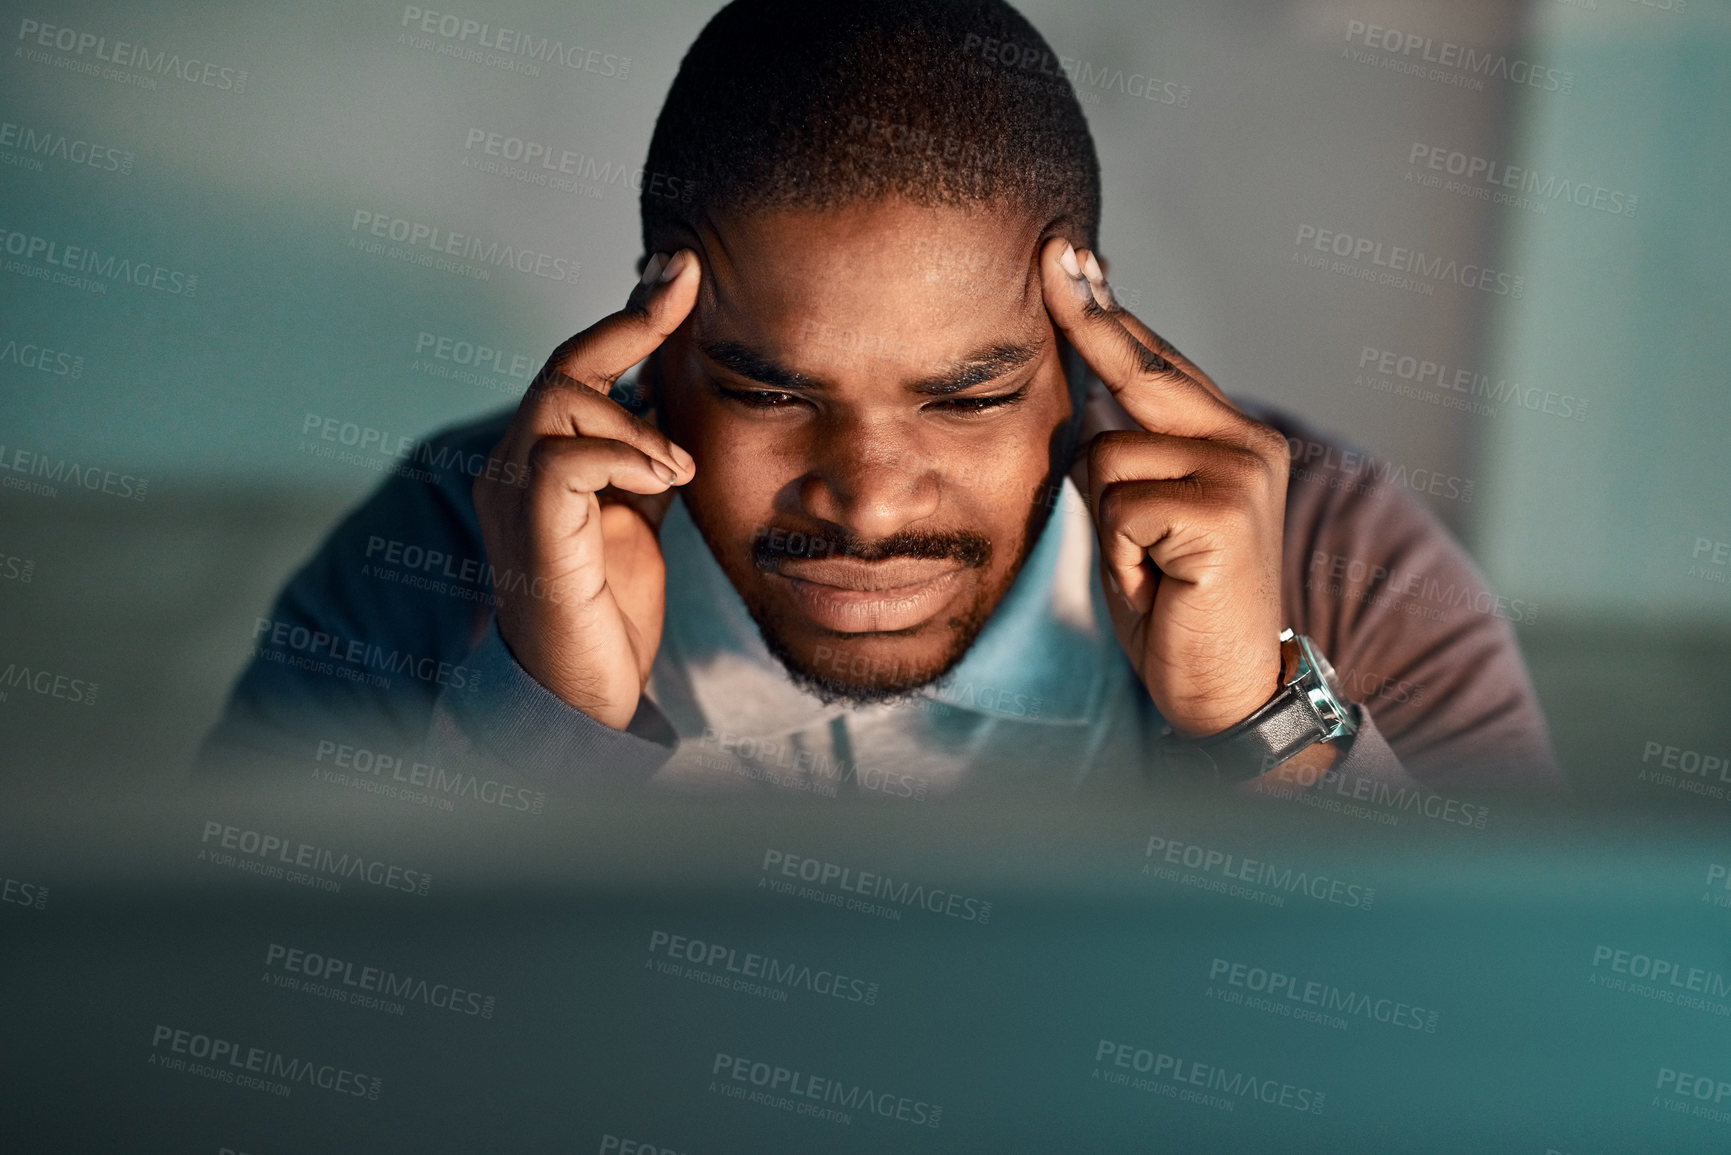 Buy stock photo Shot of a young businessman experiencing a headache at the office